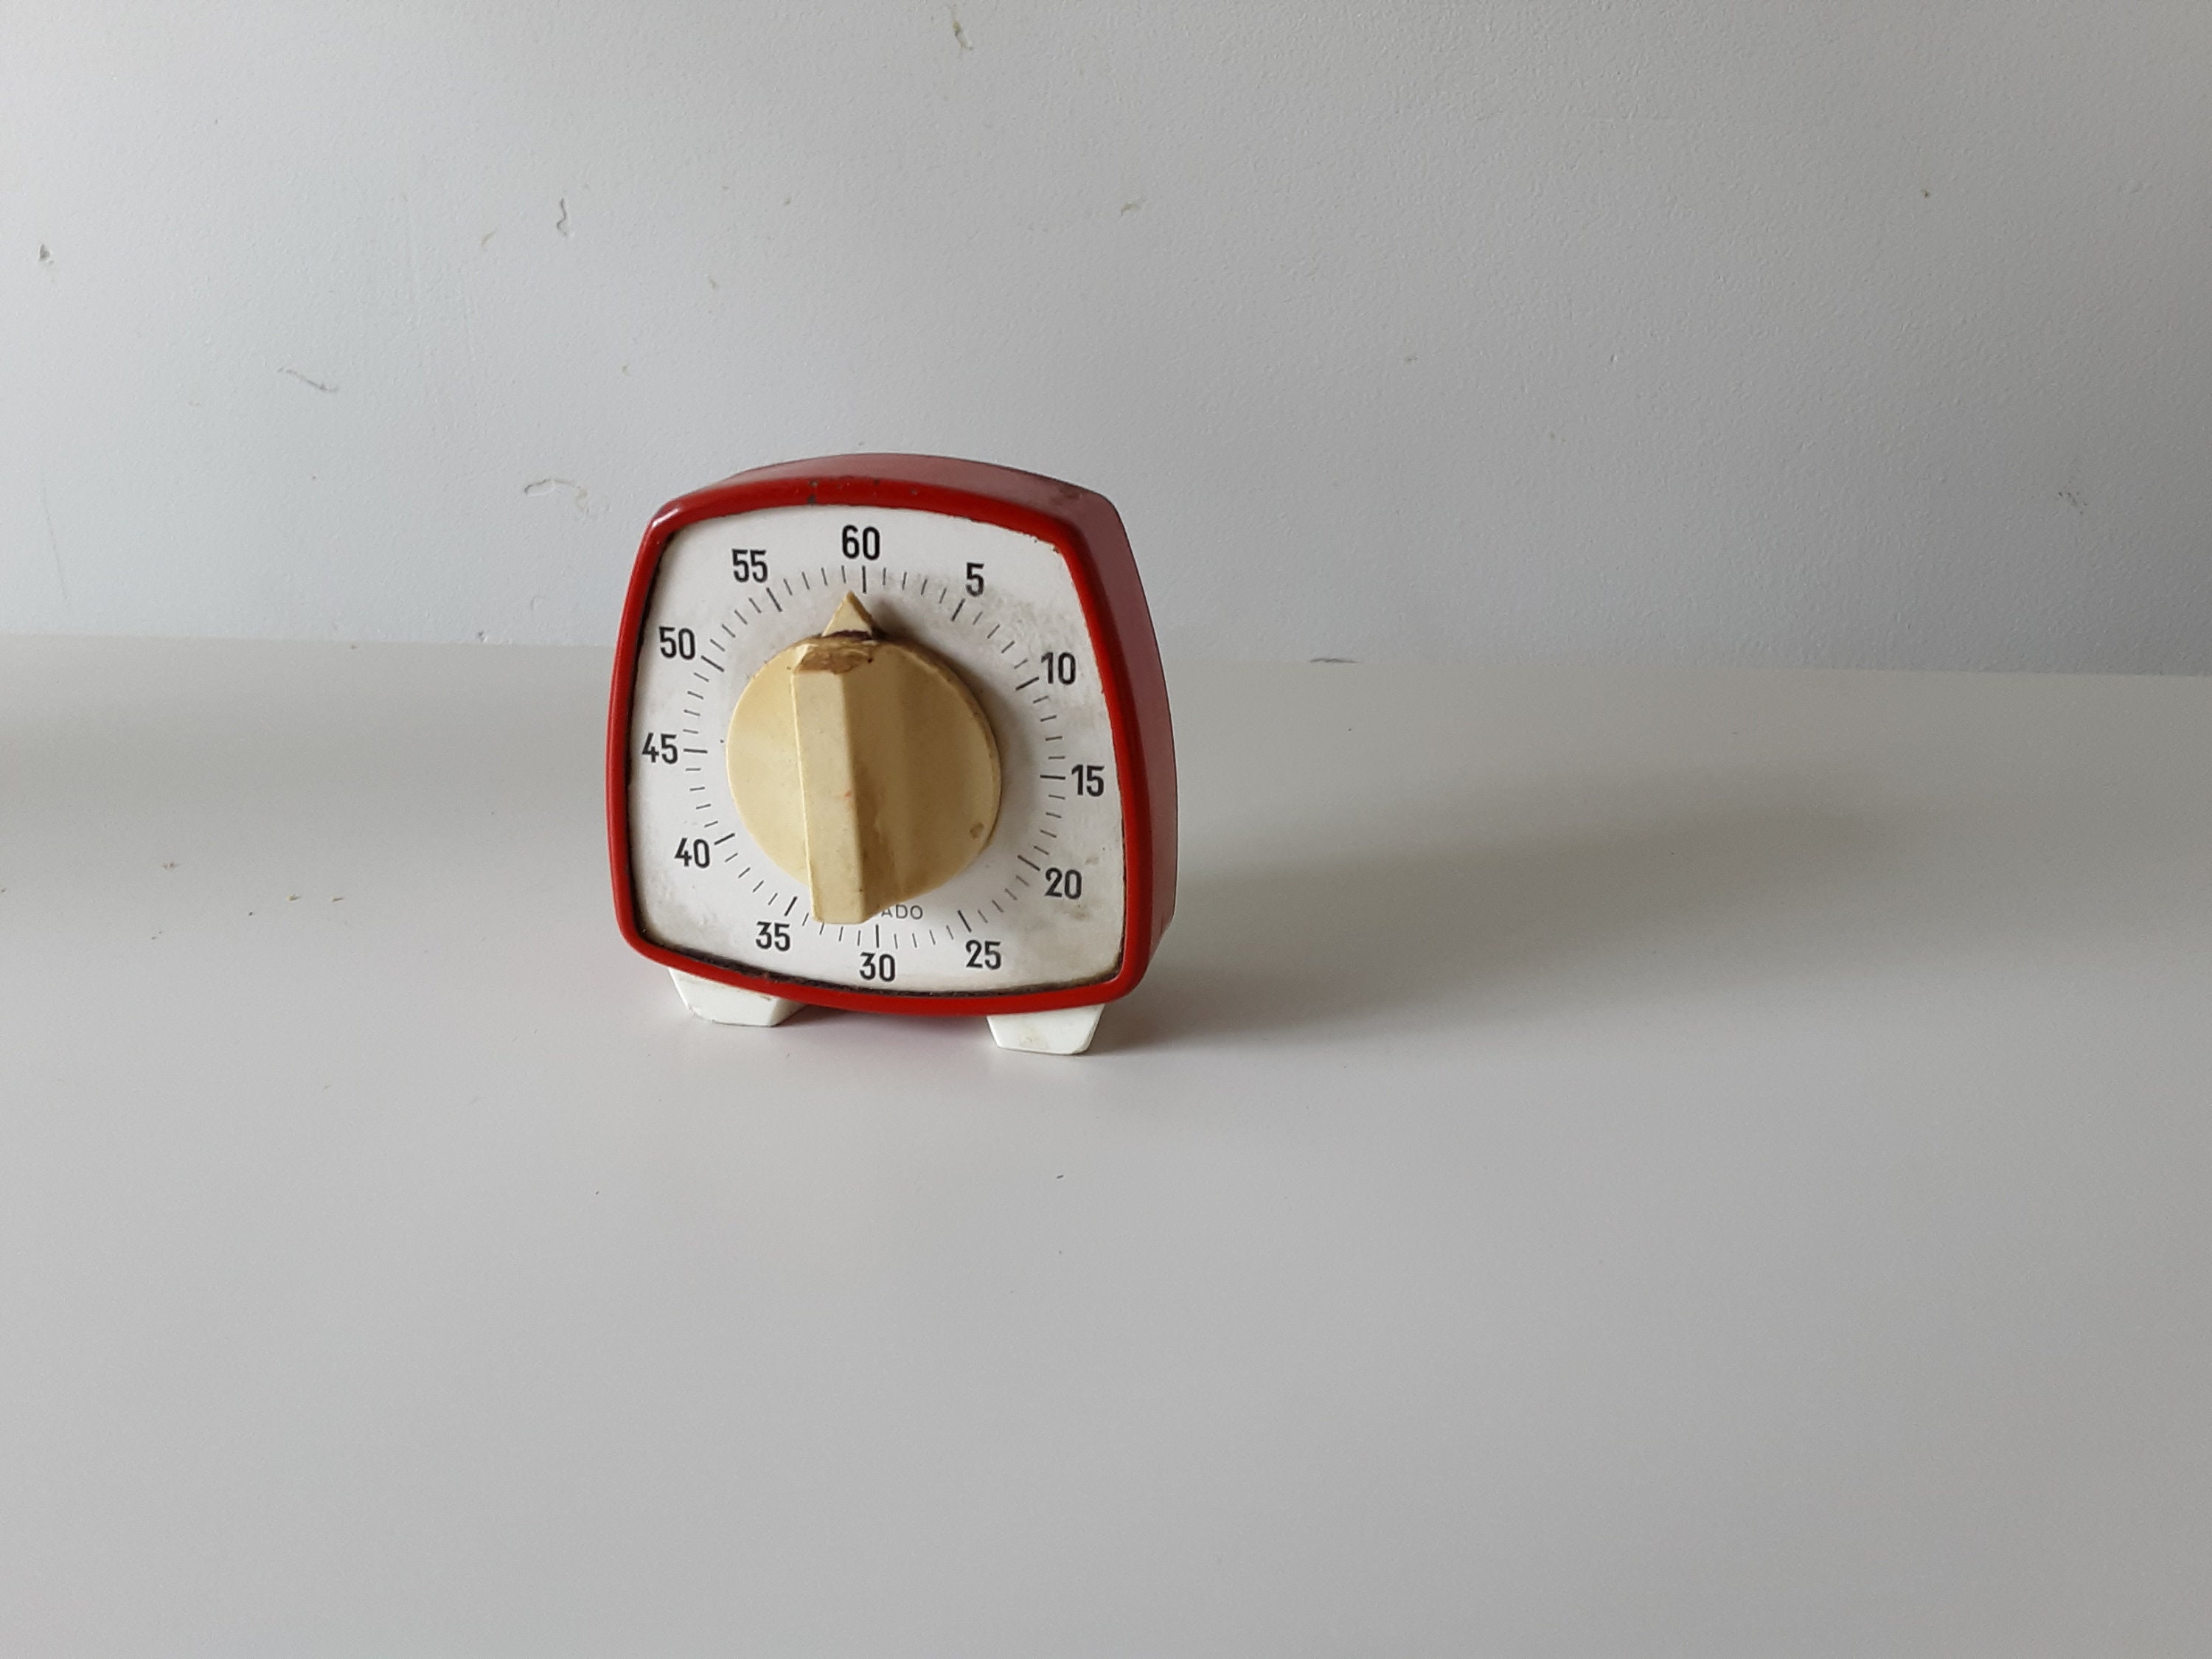 Stainless Steel Kitchen Timer, Mechanical Timer for Guinea